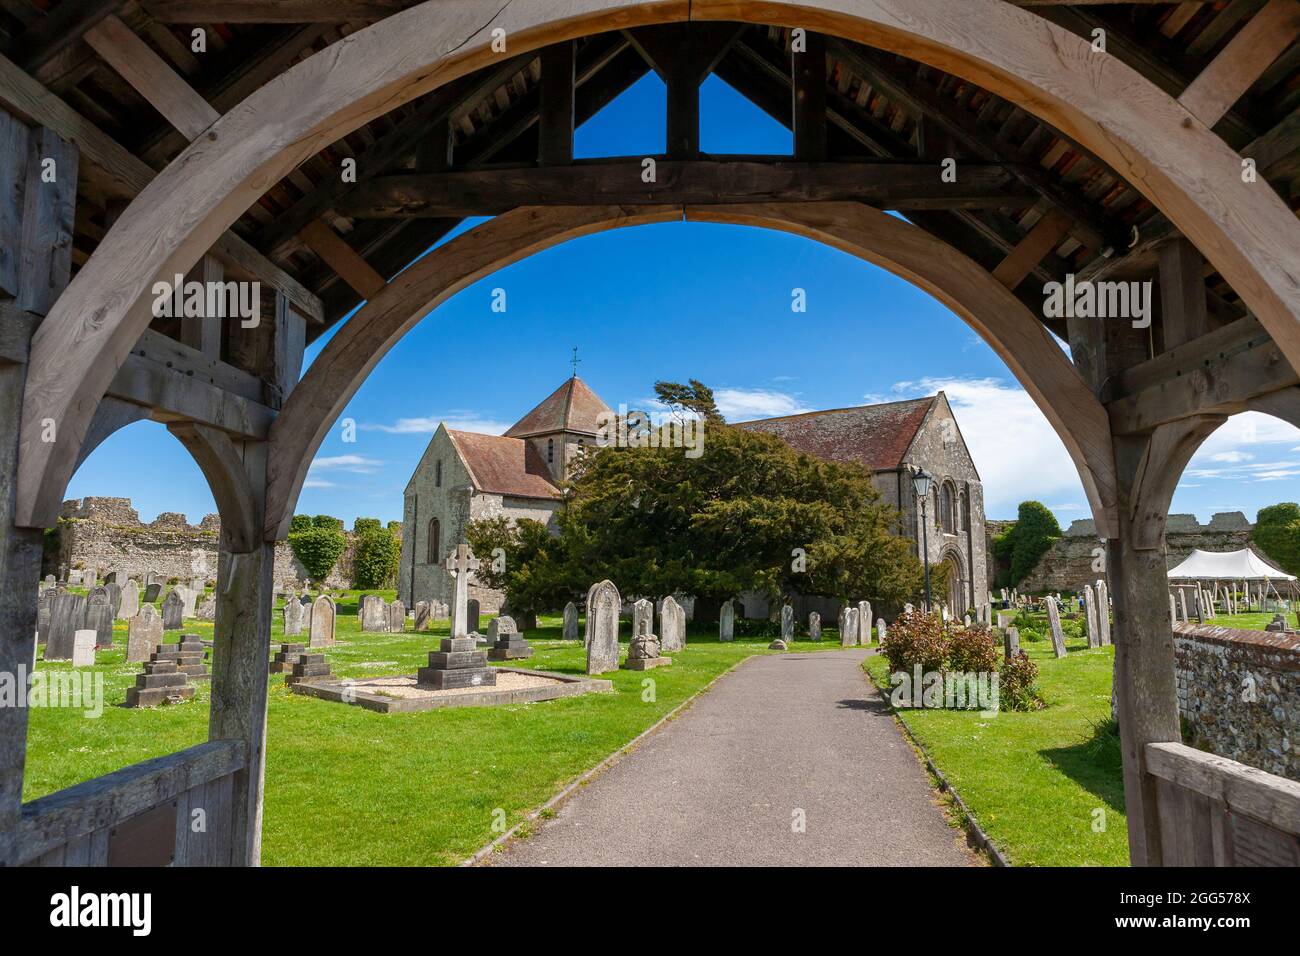 The 12th century Norman church of St Mary, within Portchester Castle's outer bailey, seen through the lychgate: Portchester, Hampshire, UK Stock Photo